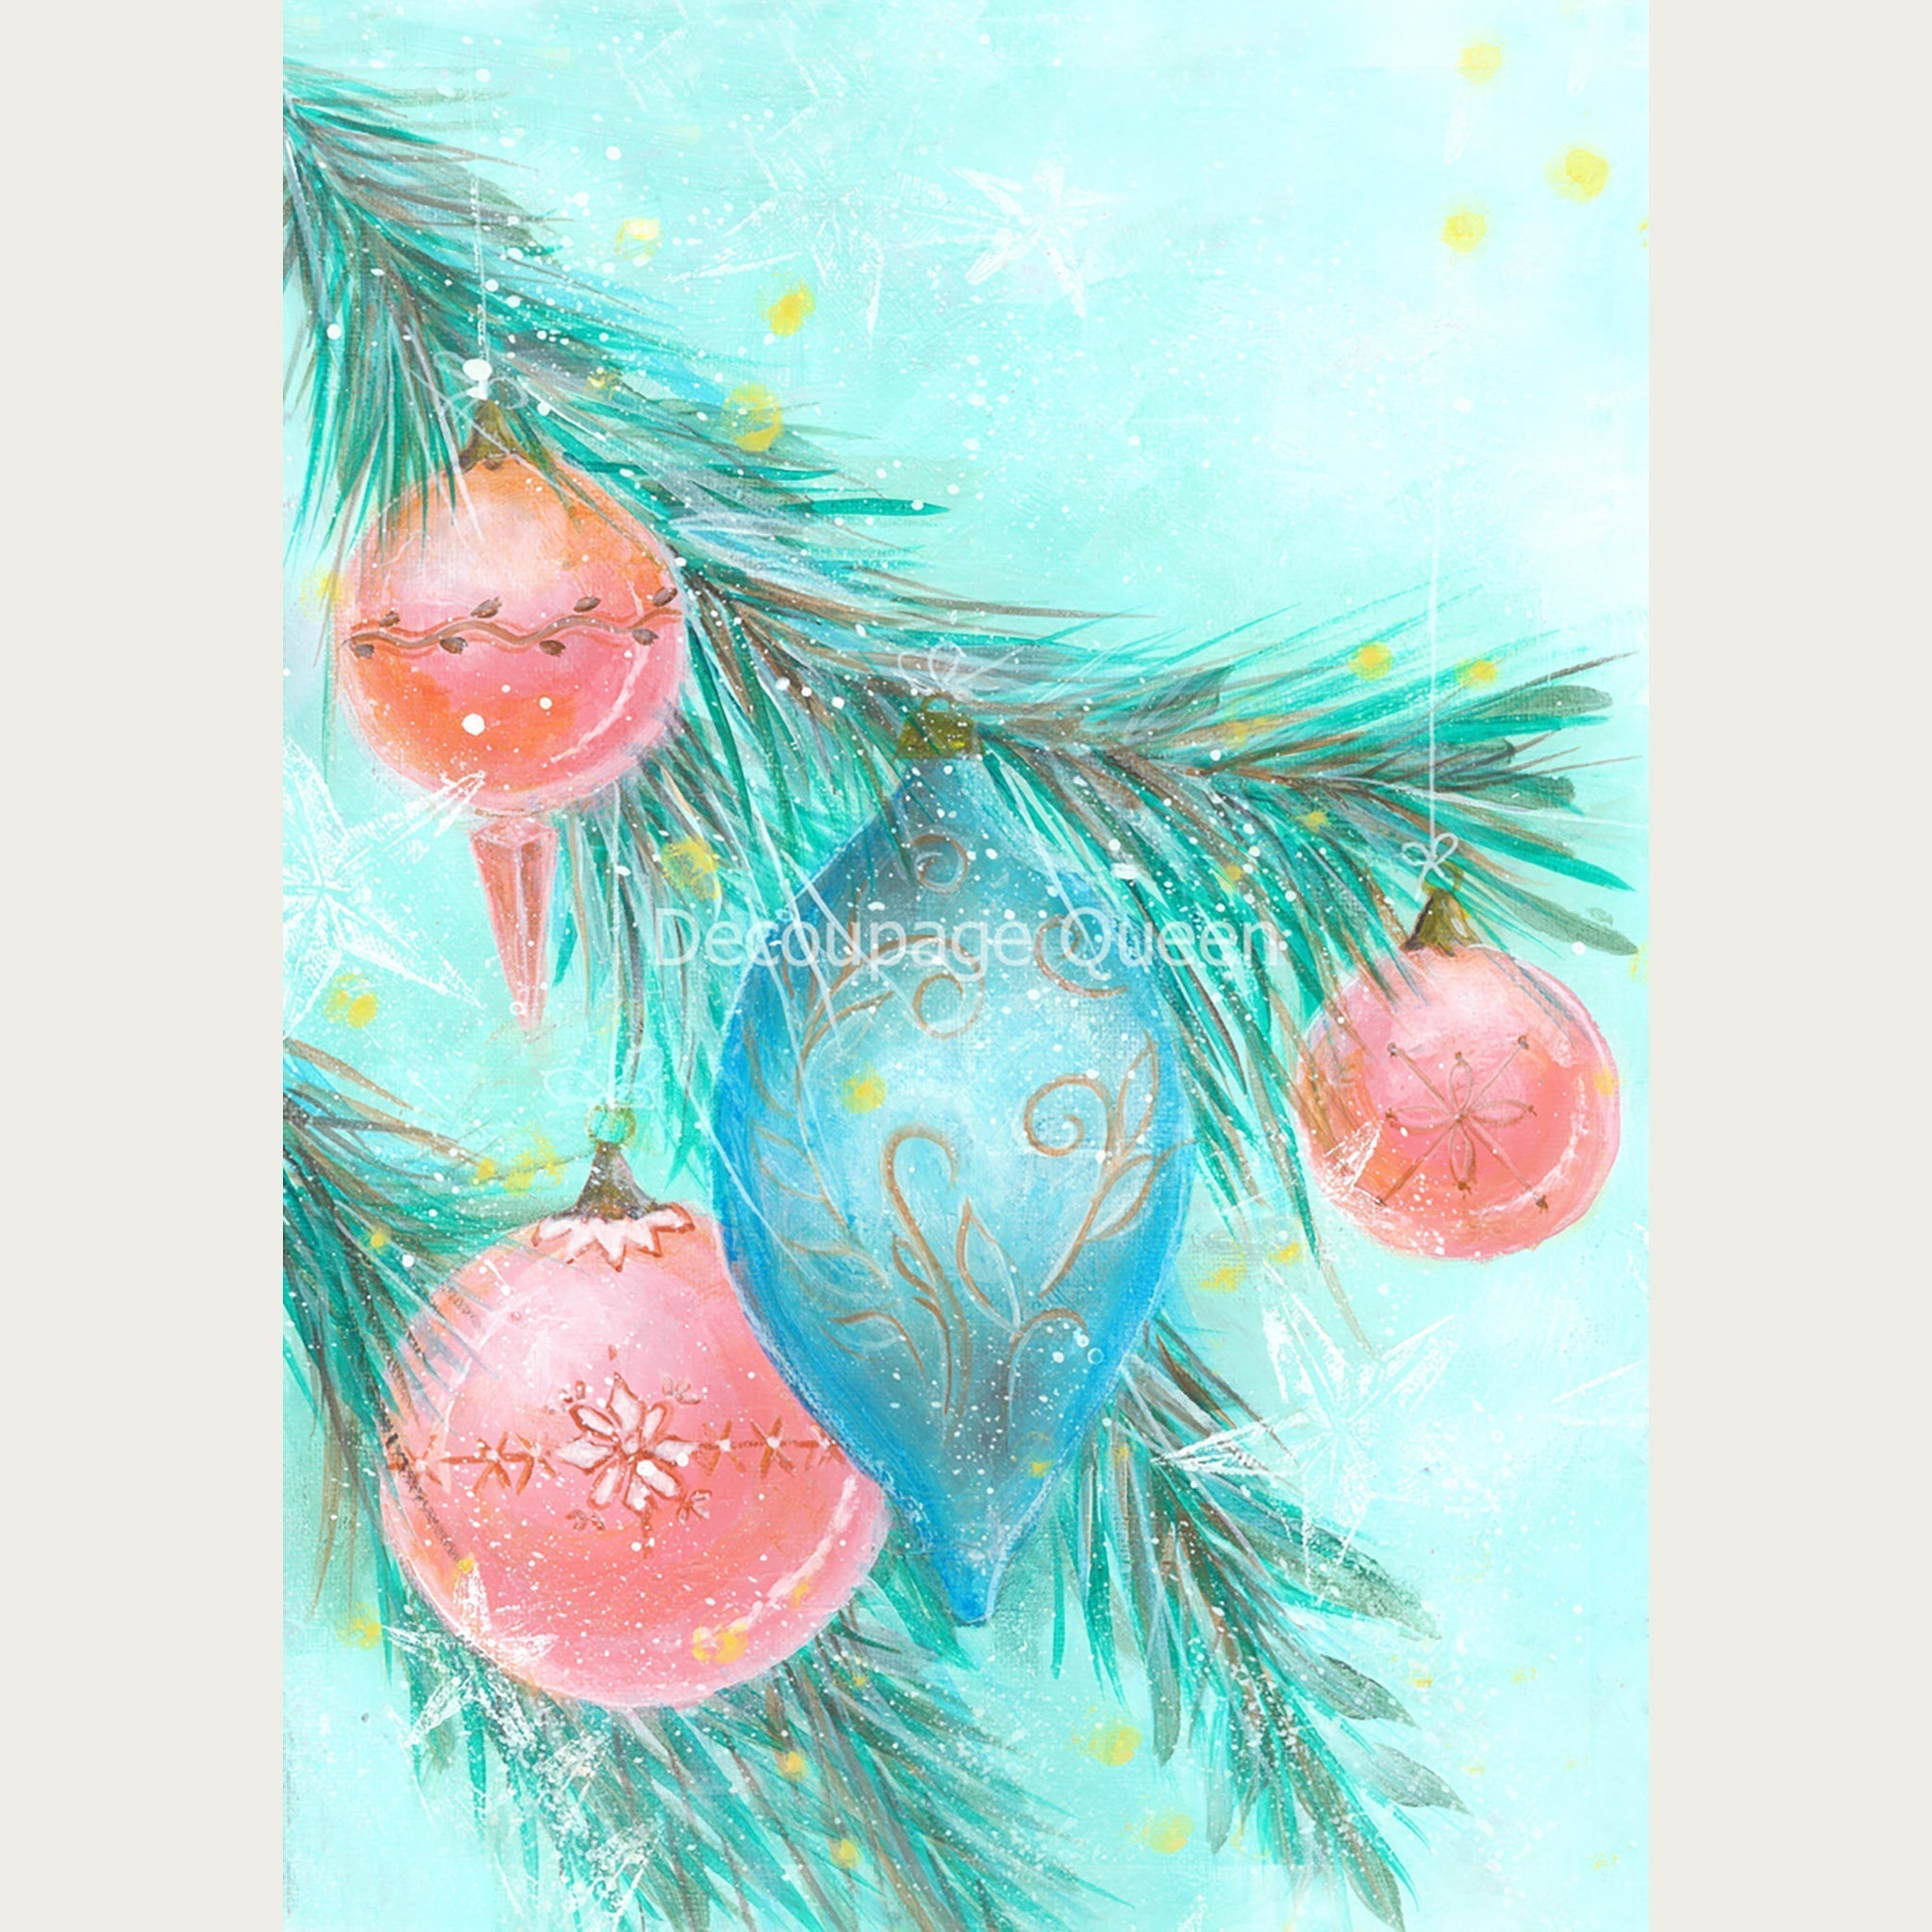 Hand painted style A0 rice paper design of pink and blue ornaments on a pine tree on a soft teal background. White borders areon the sides.